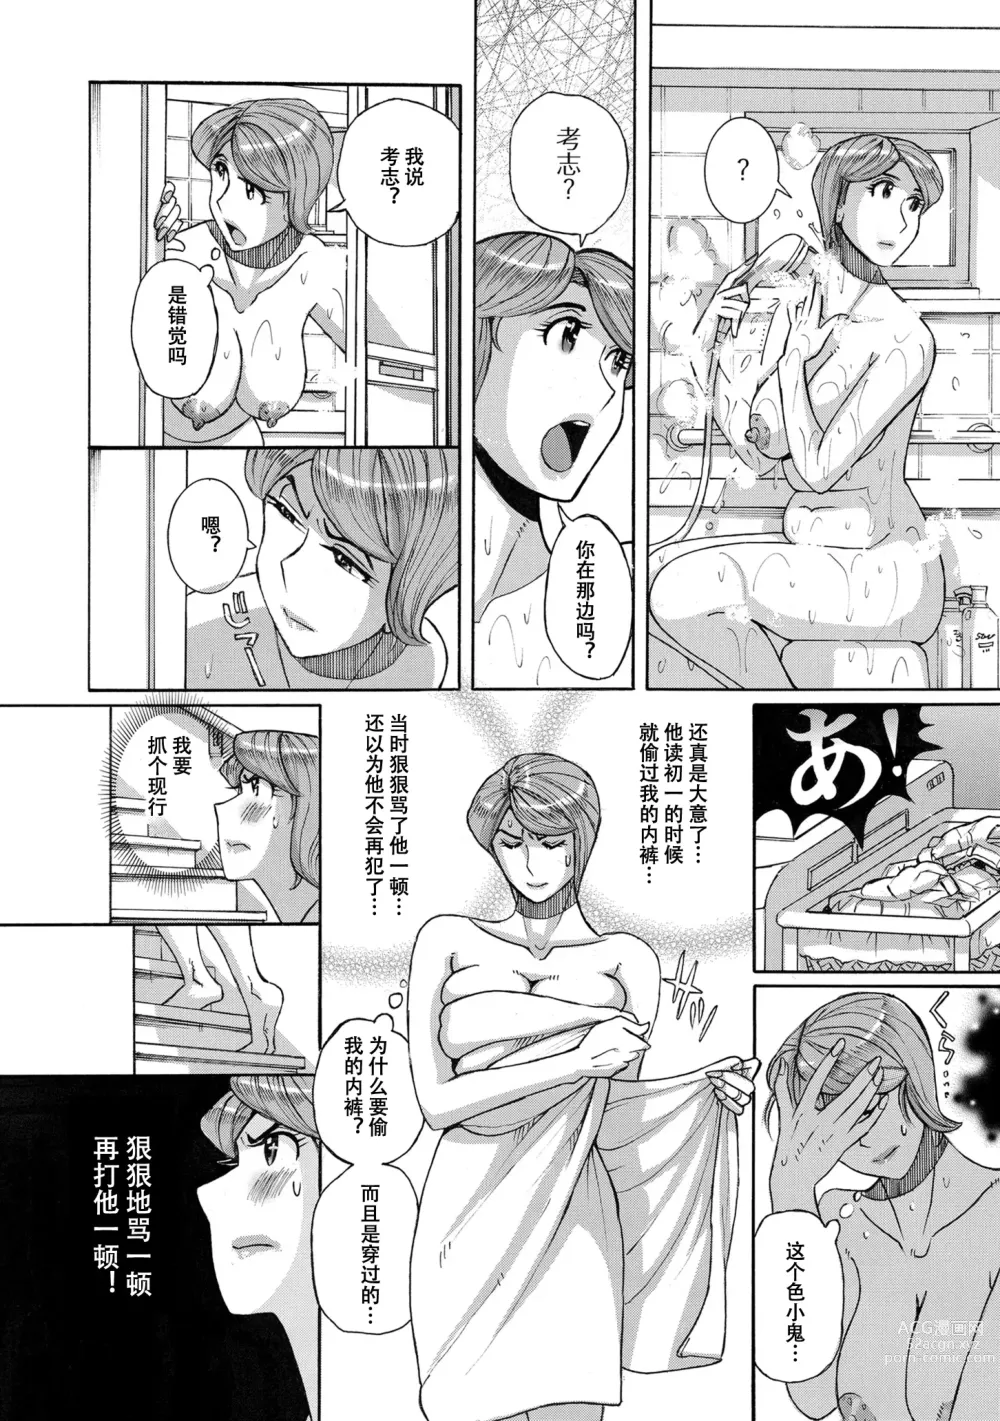 Page 6 of manga Mother’s Care Service How to Wincest’